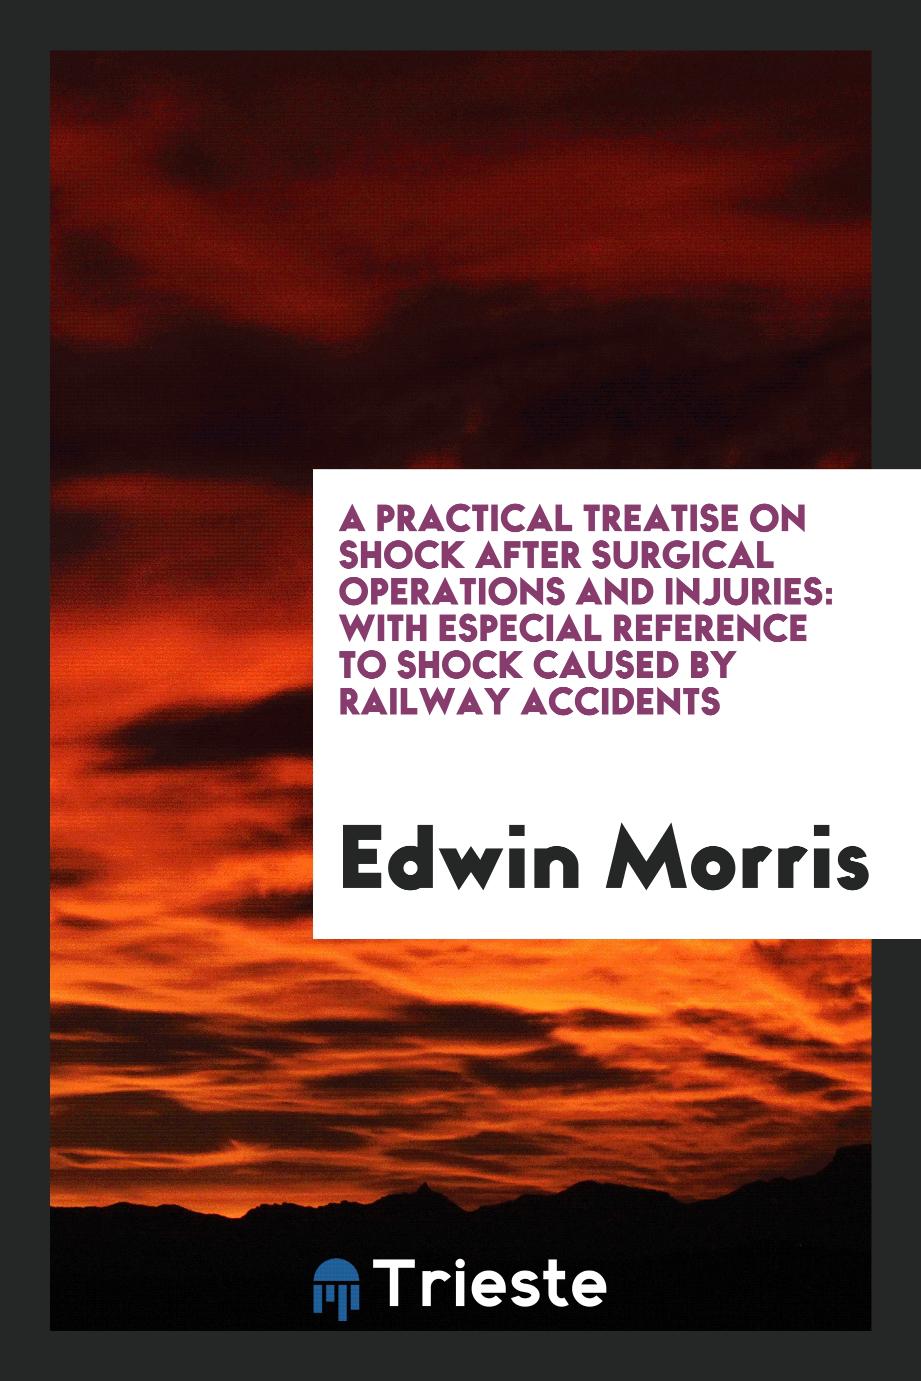 A Practical Treatise on Shock After Surgical Operations and Injuries: With Especial Reference to Shock Caused by Railway Accidents